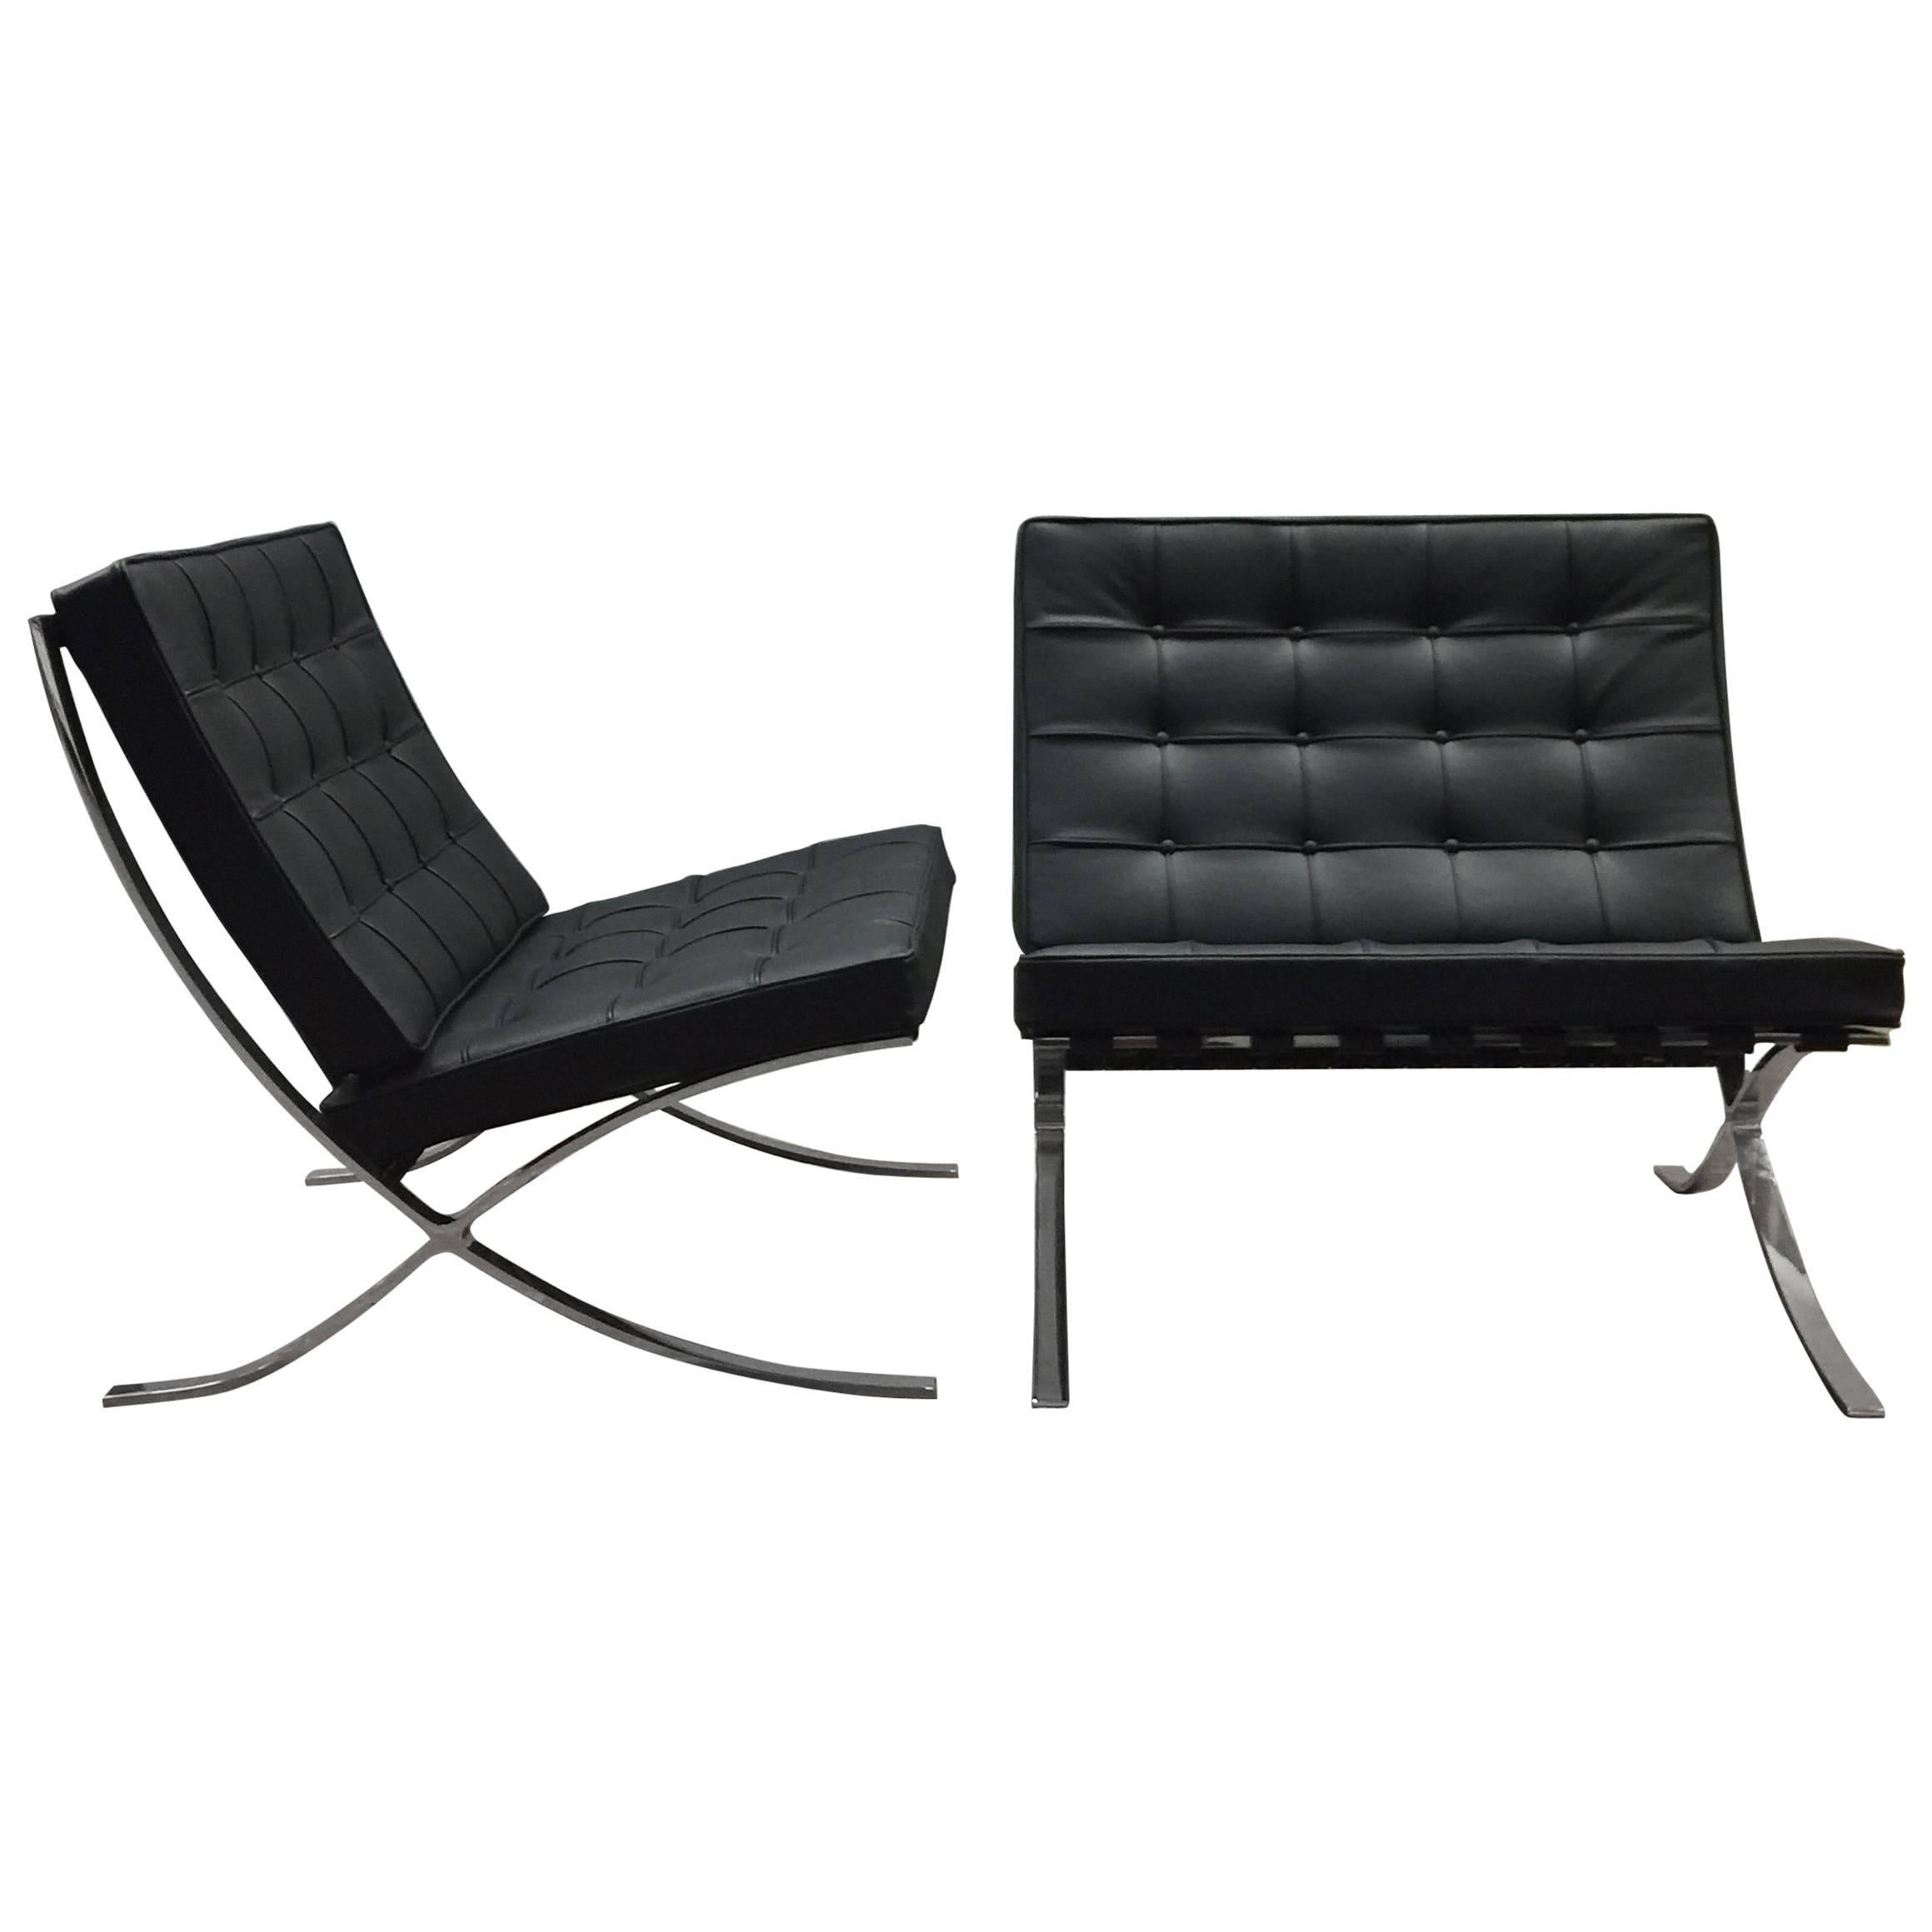 Pair of Ludwig Mies van der Rohe Barcelona Chairs, Knoll Edition